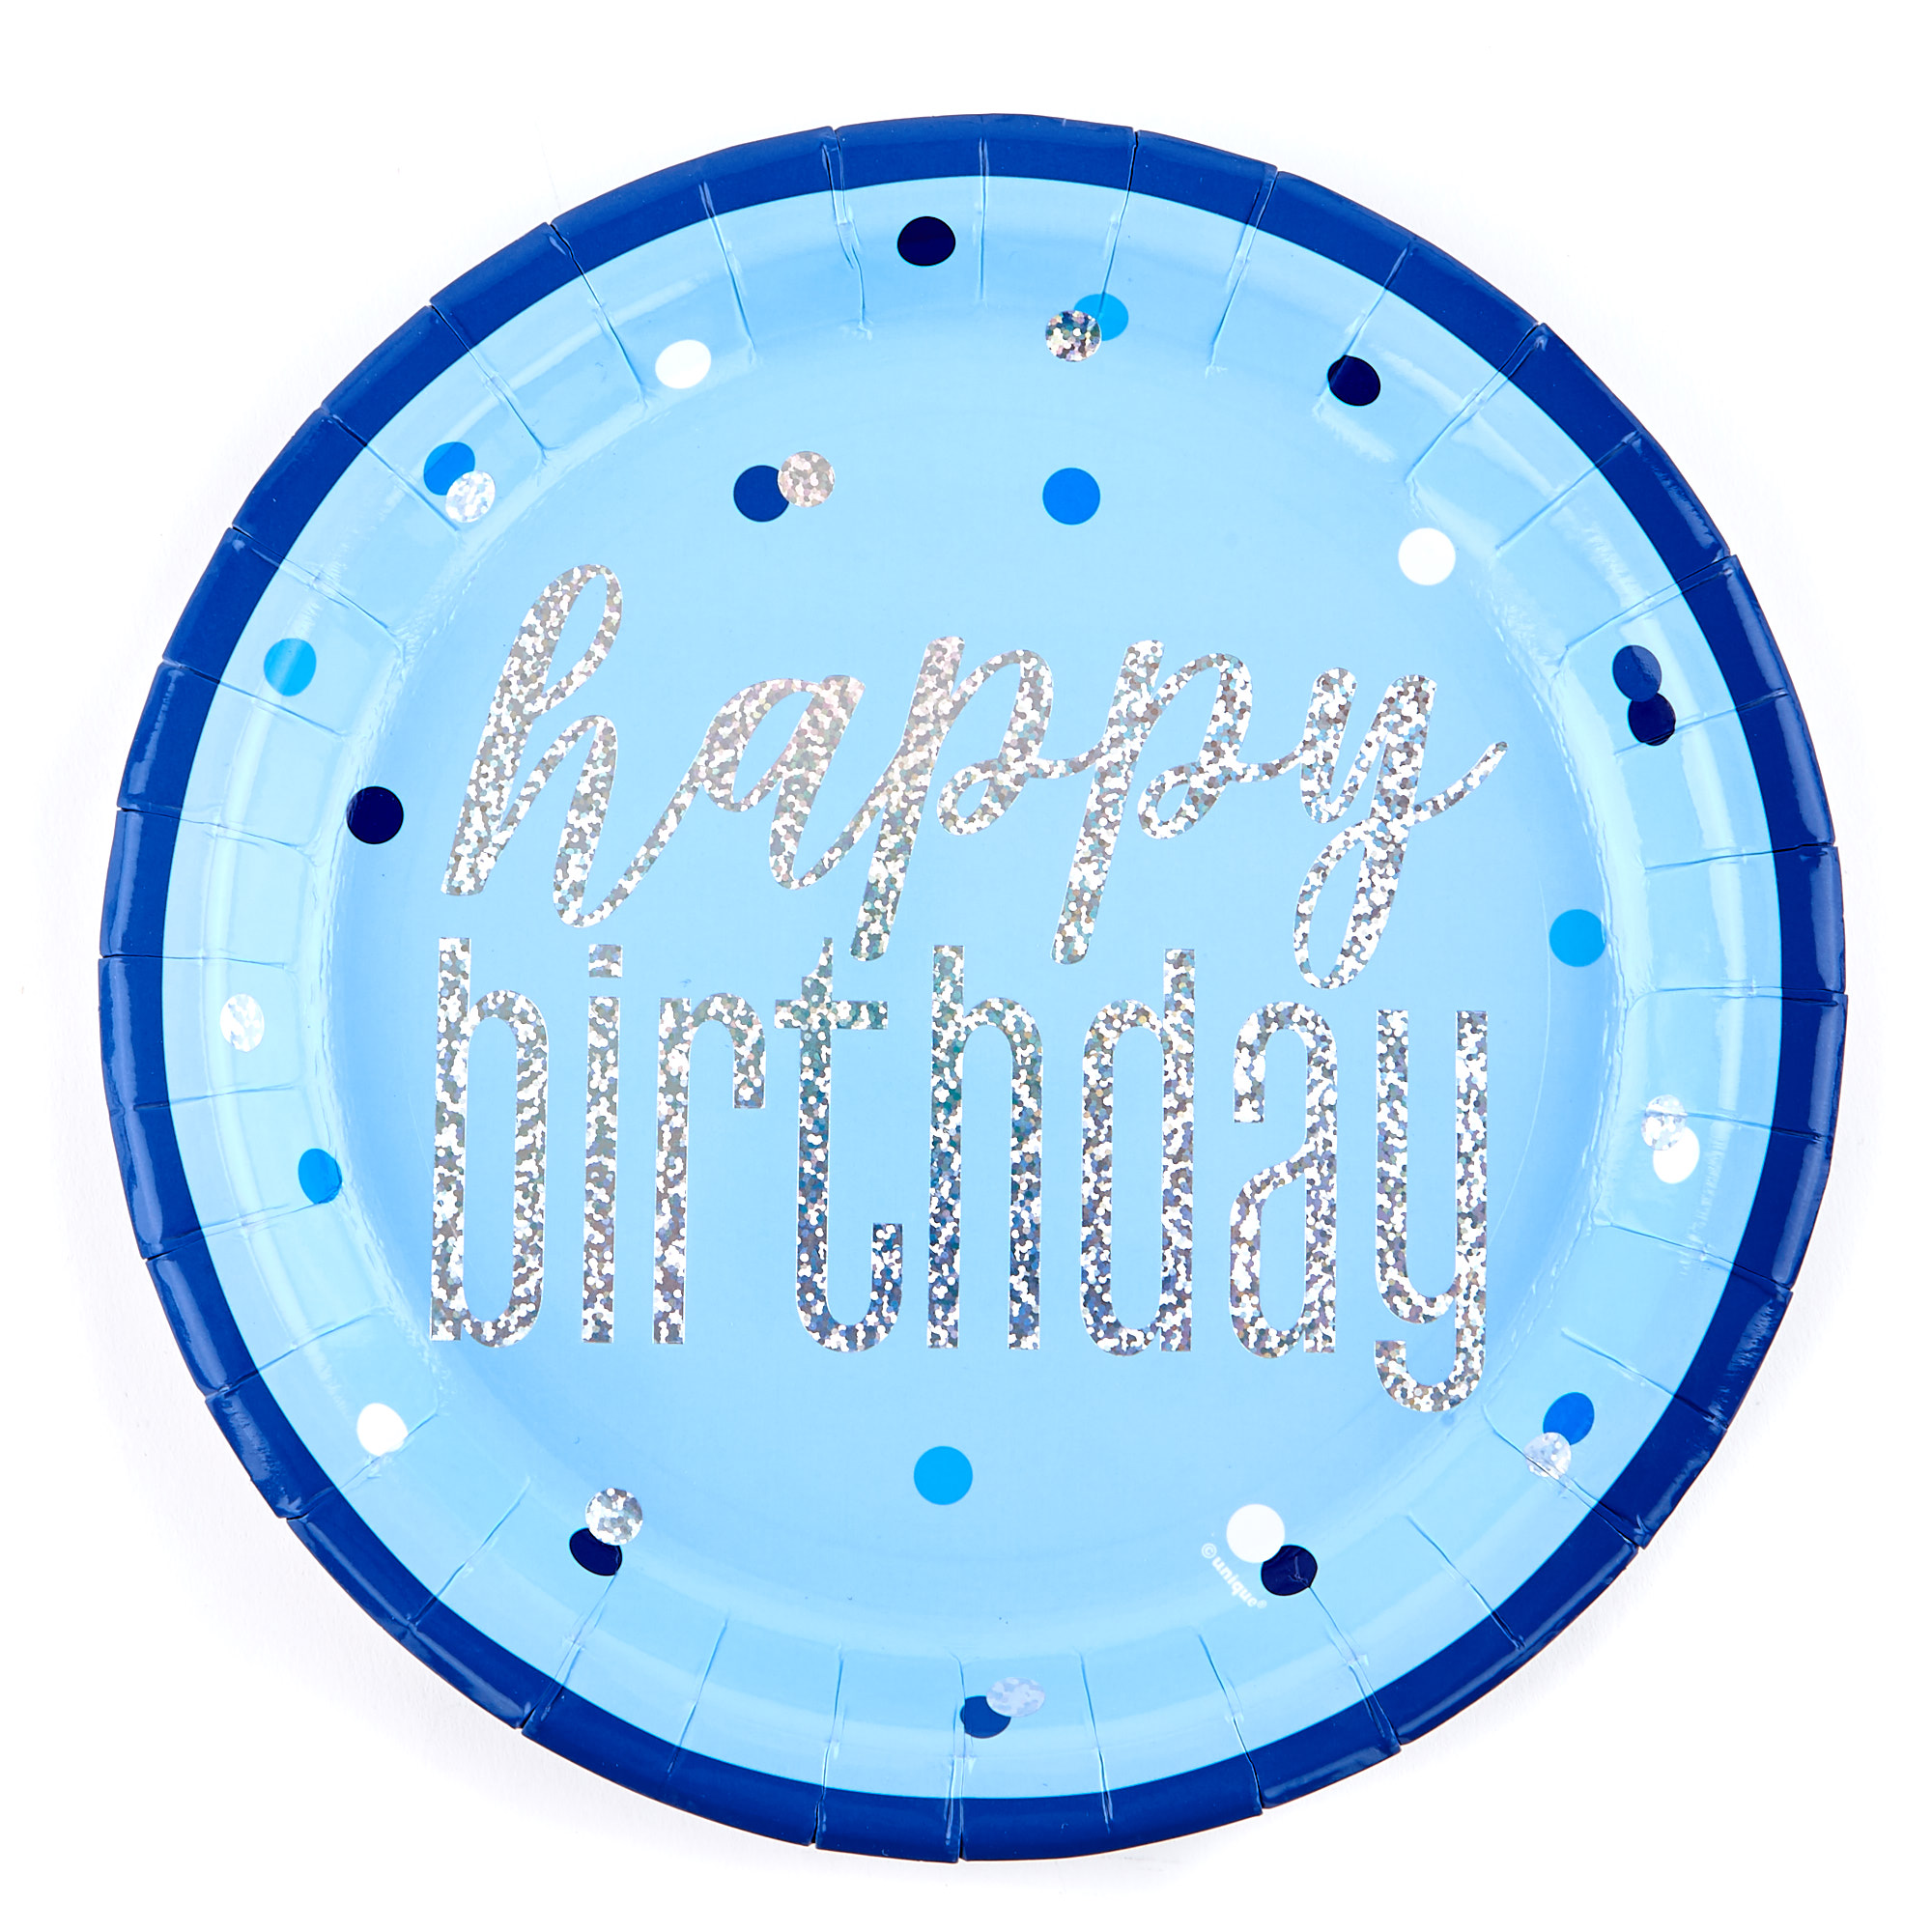 Blue 30th Birthday Party Tableware & Decorations Bundle - 16 Guests